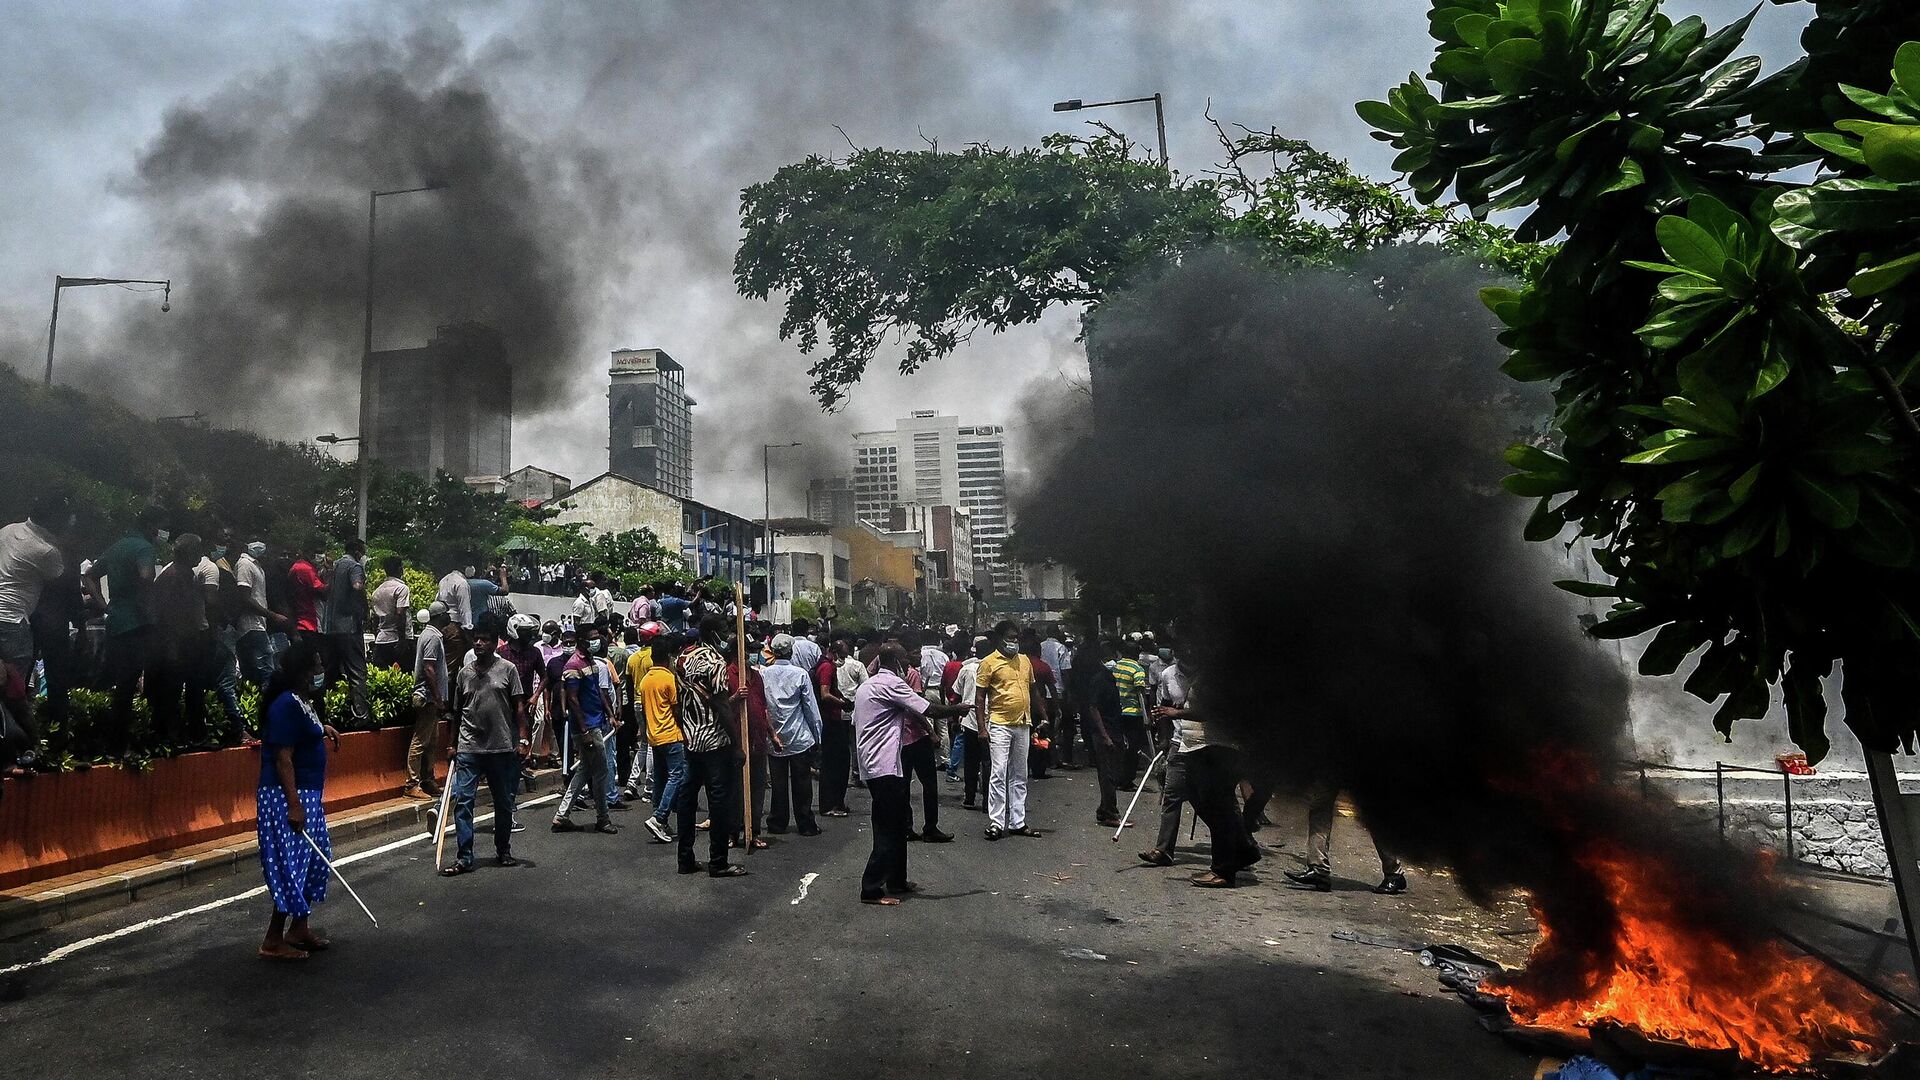 Demonstrators and government supporters clash outside the official residence of Sri Lanka's Prime Minister Mahinda Rajapaksa, in Colombo on May 9, 2022. - - Sputnik International, 1920, 10.05.2022